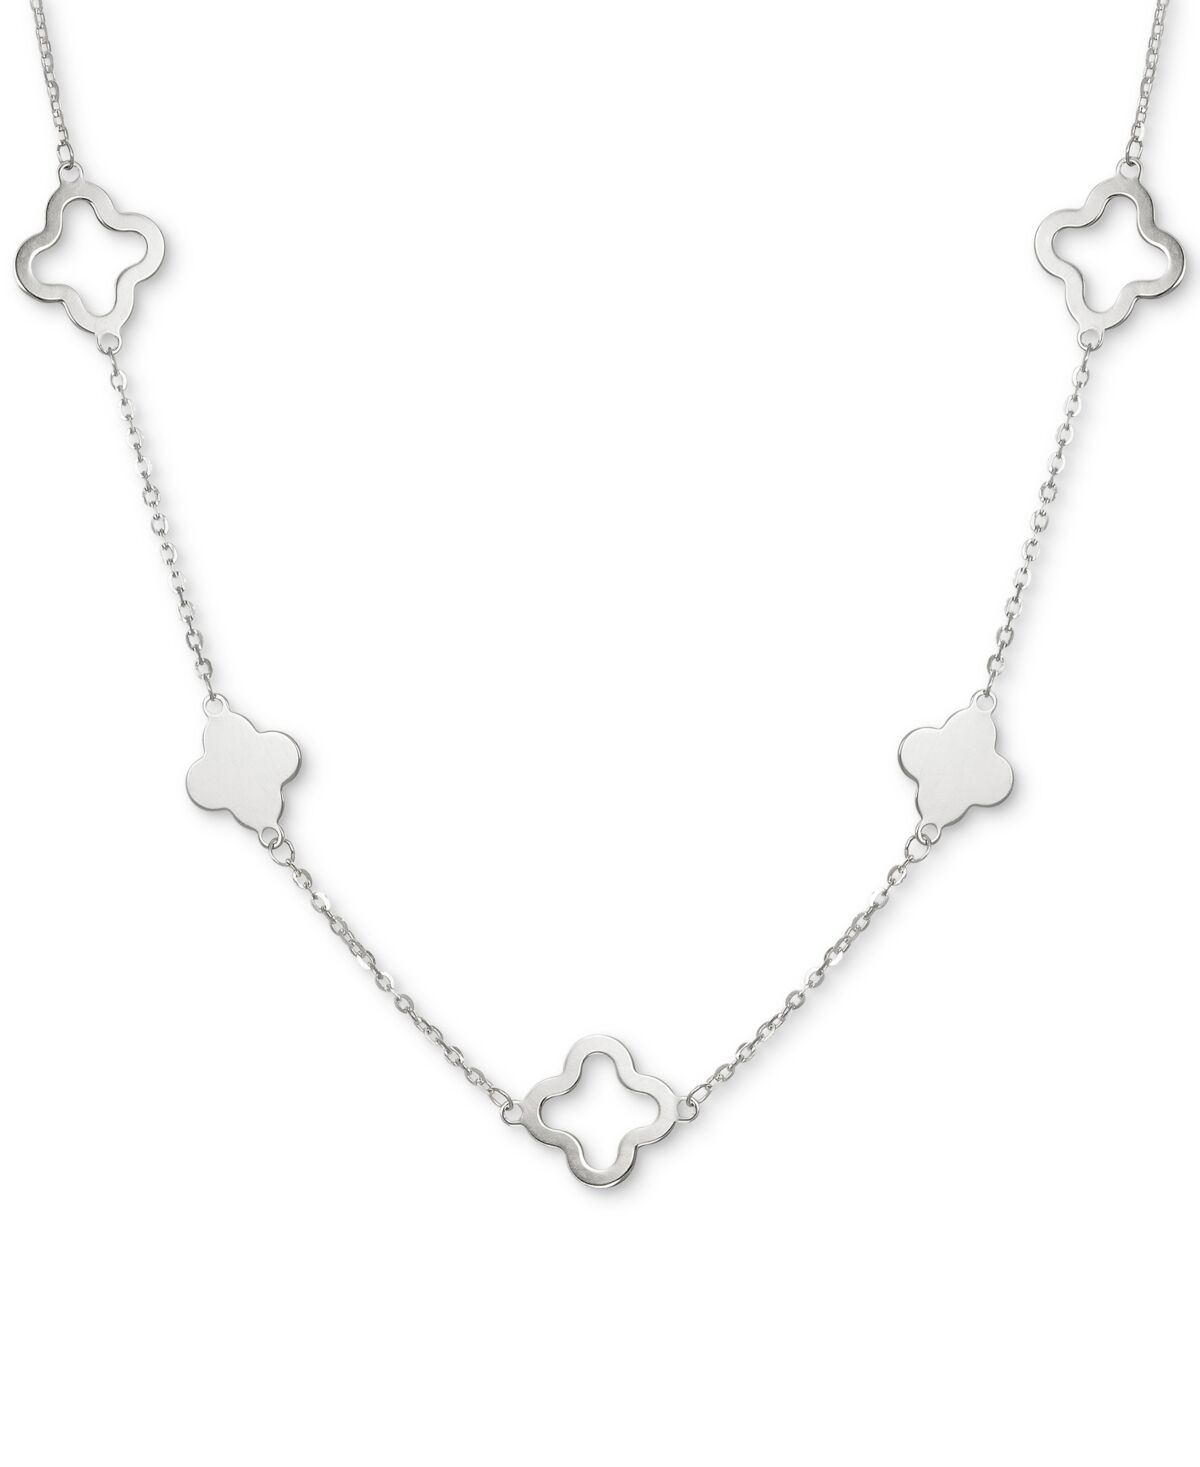 Macy's Clover Necklace in 14k Gold - White Gold